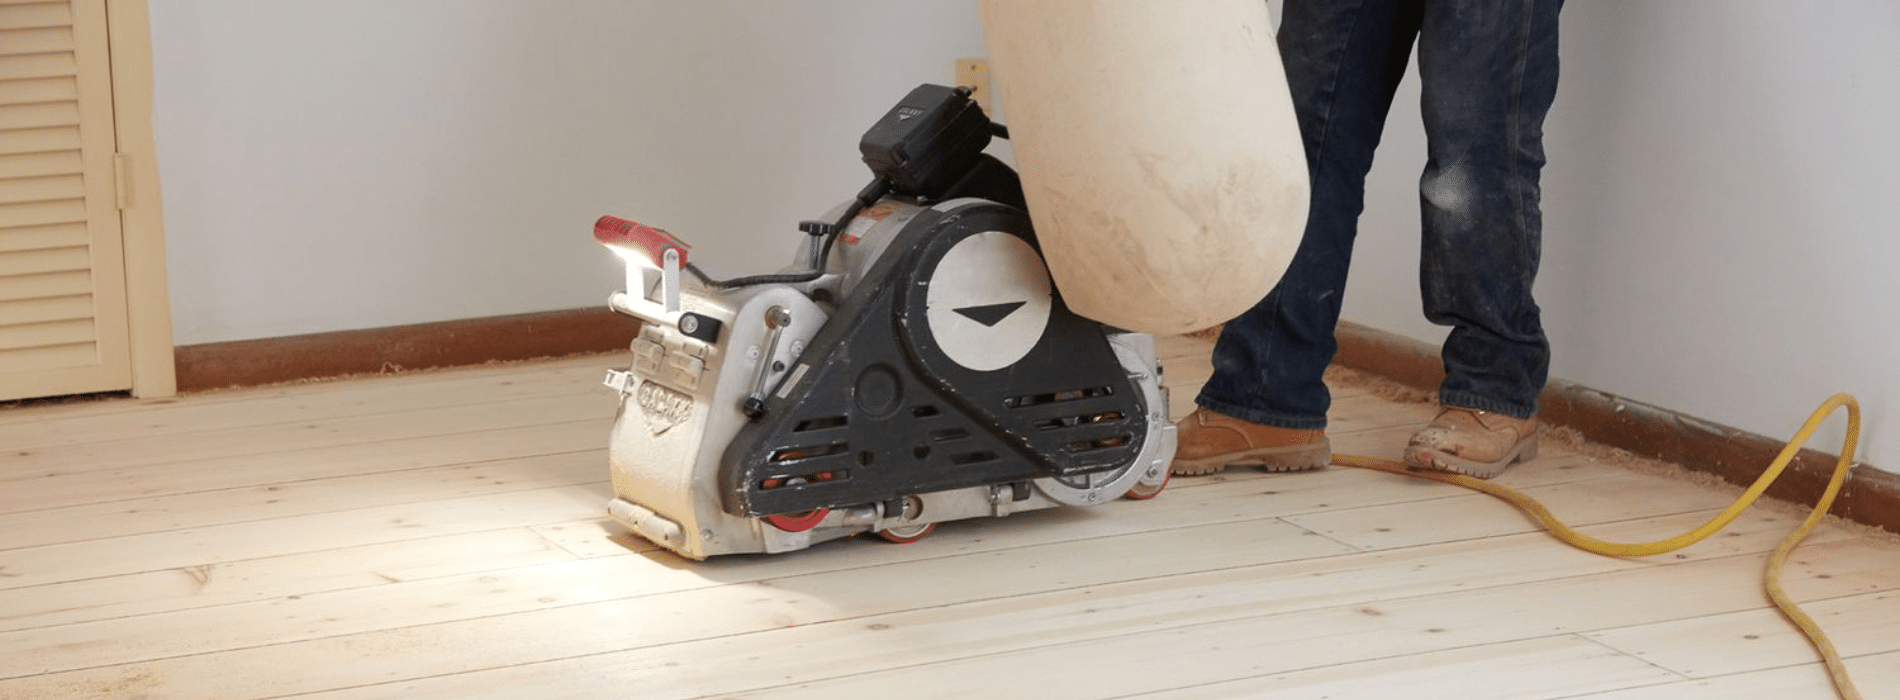 Mr Sander® use a Bona Scorpion, a powerful 200mm drum sander, to sand parquet floors in Hayes, UB3. With a 1.5 kW effect, 240V voltage, and 50Hz frequency, it delivers efficient results. The dust extraction system, equipped with a HEPA filter, ensures a clean environment throughout the process. 